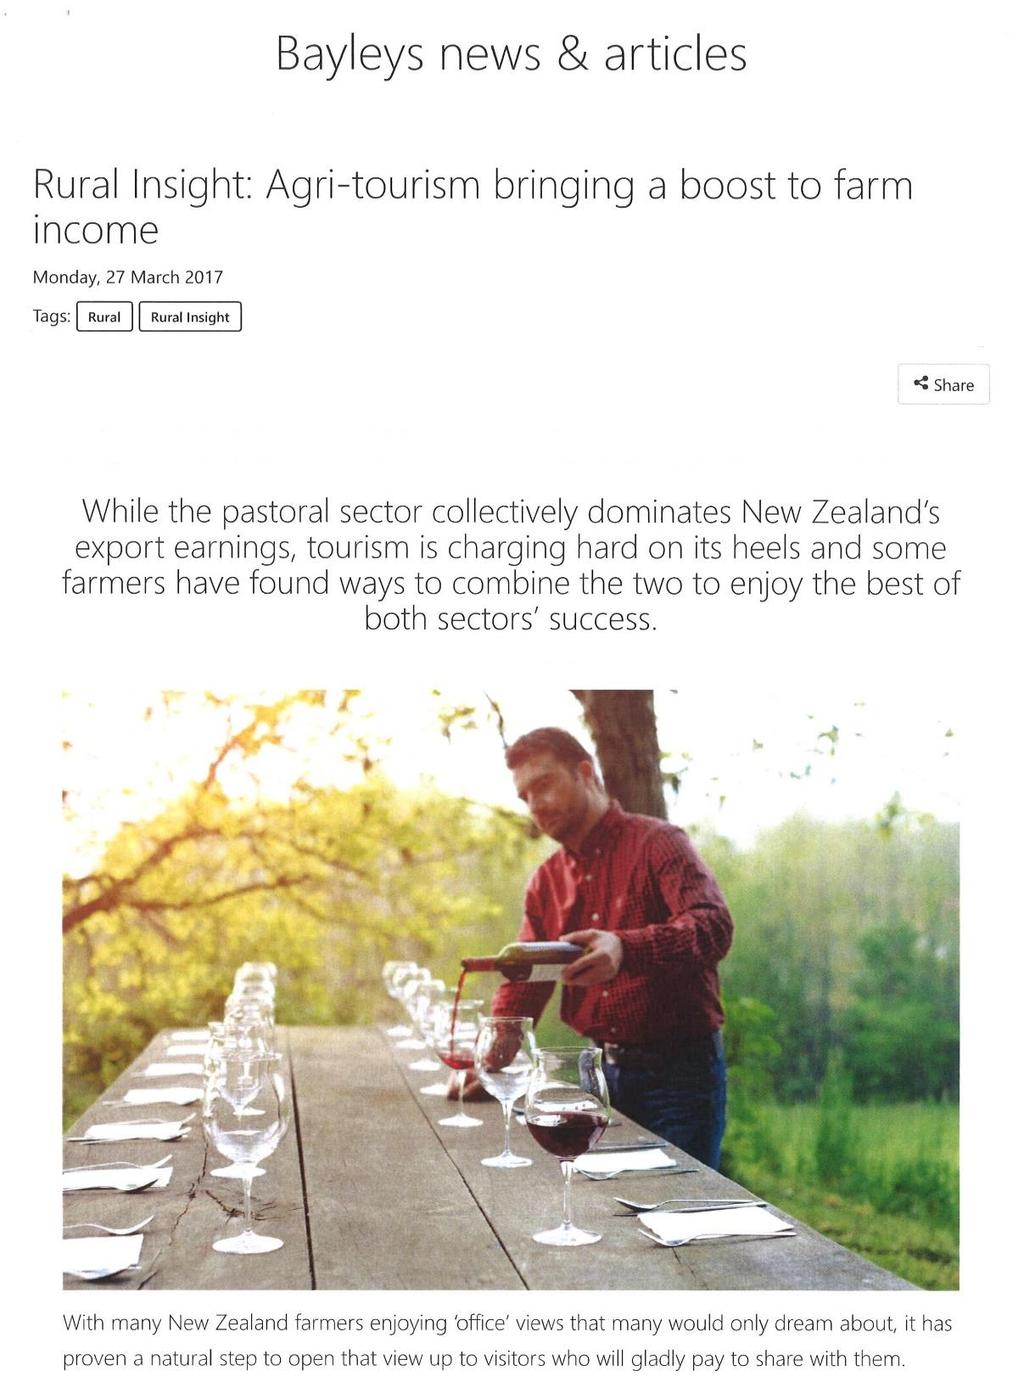 Agritourism in New Zealand A 20 th century feature of NZ tourism 1980s saw a flowering of agritourism - radical neoliberal restructuring and farm subsidy removal = Agritourism for economic survival